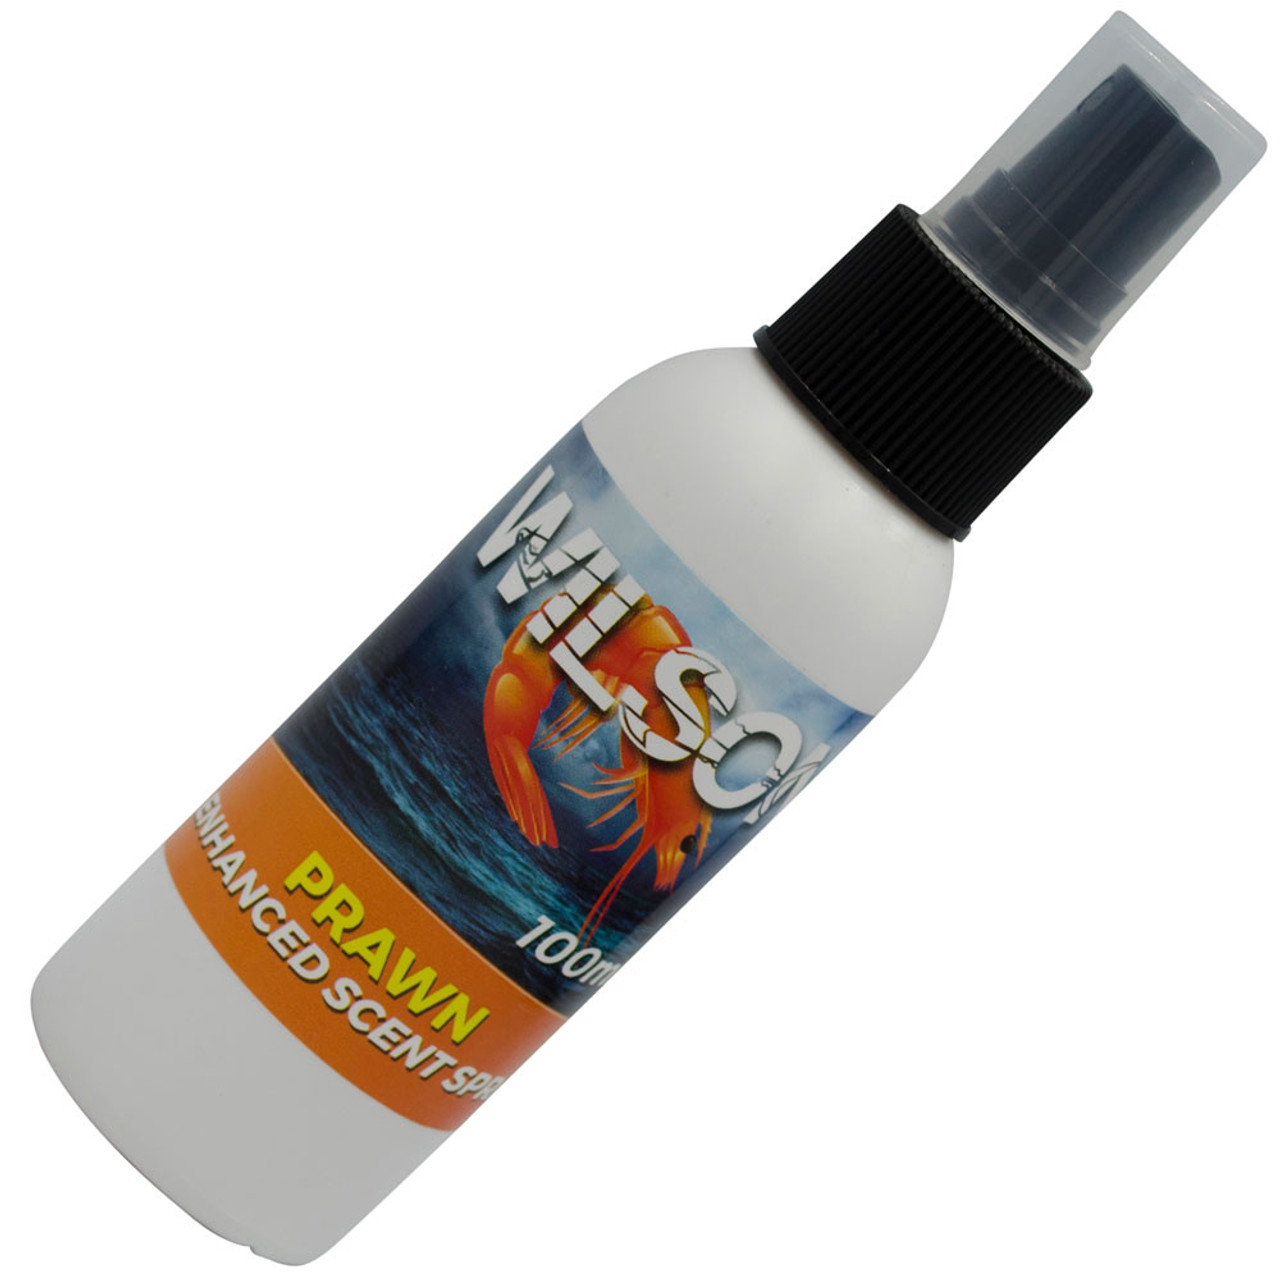 The Best Choice for All the people - Clearance Wilson Fishing Scent  Attractant Spray sale 66%